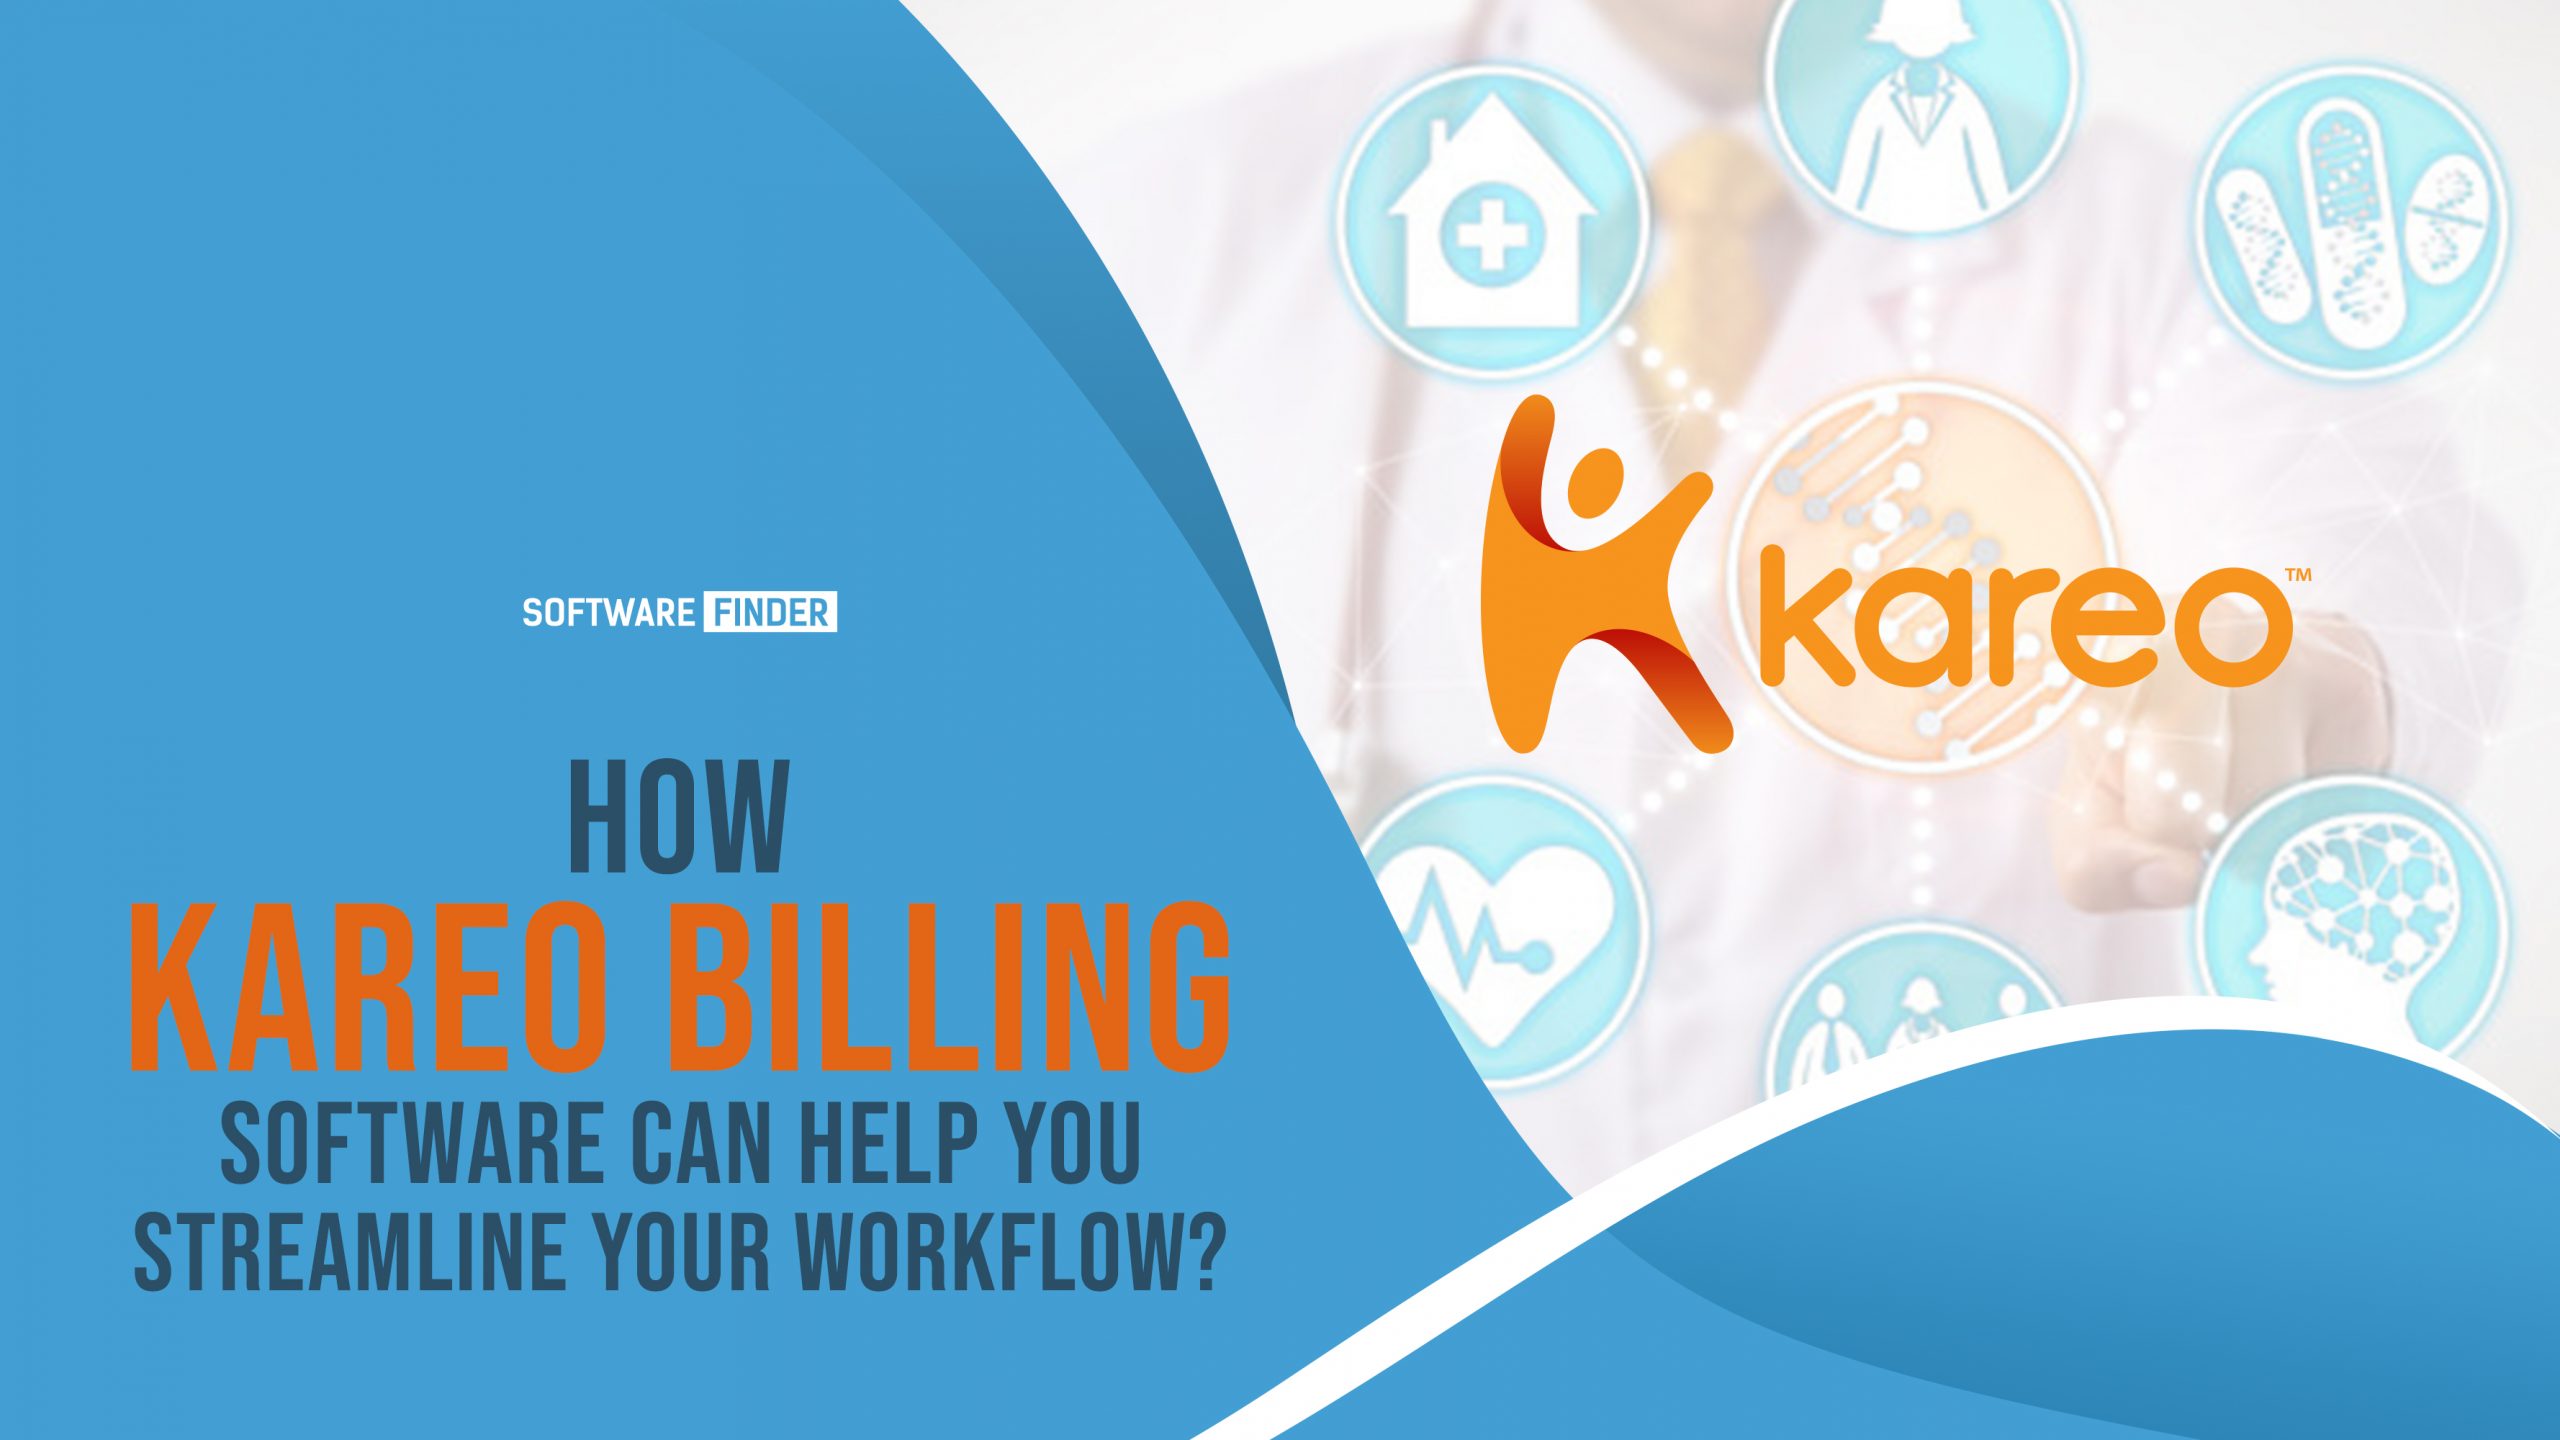 How Kareo Billing Software Can Help You Streamline Your Workflow